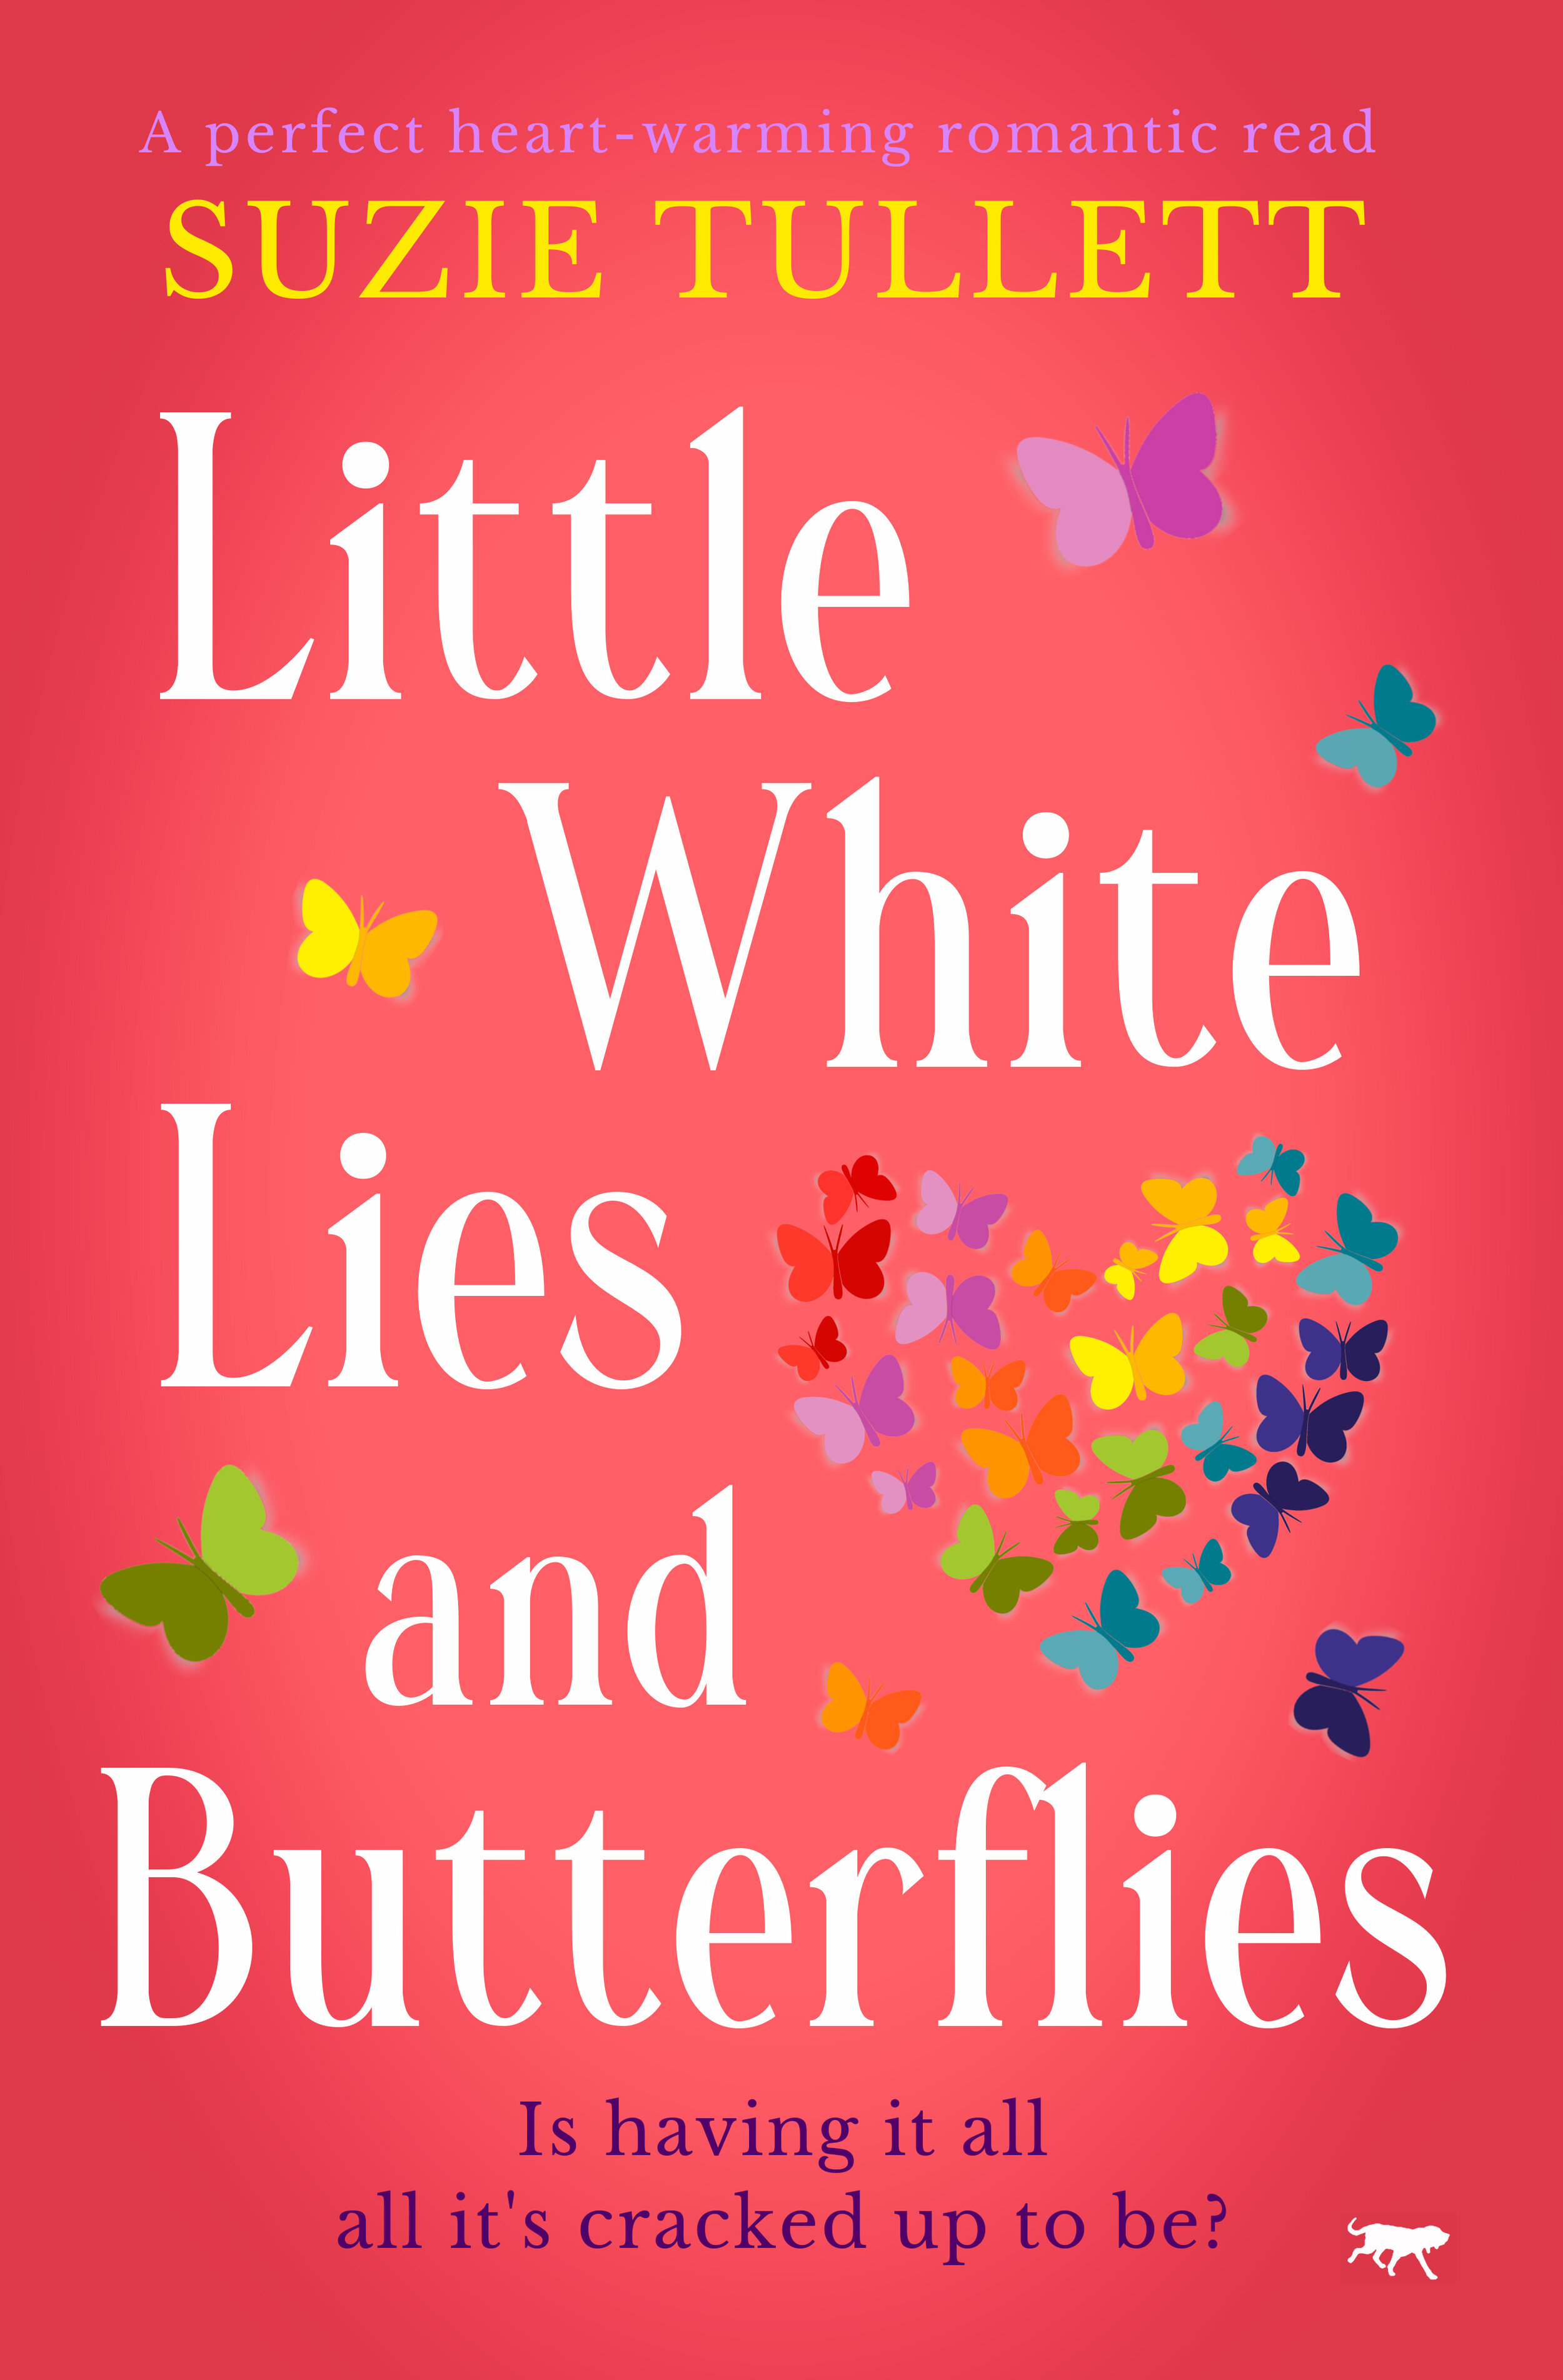 Little white Lies and Butterflies - Revised.jpg